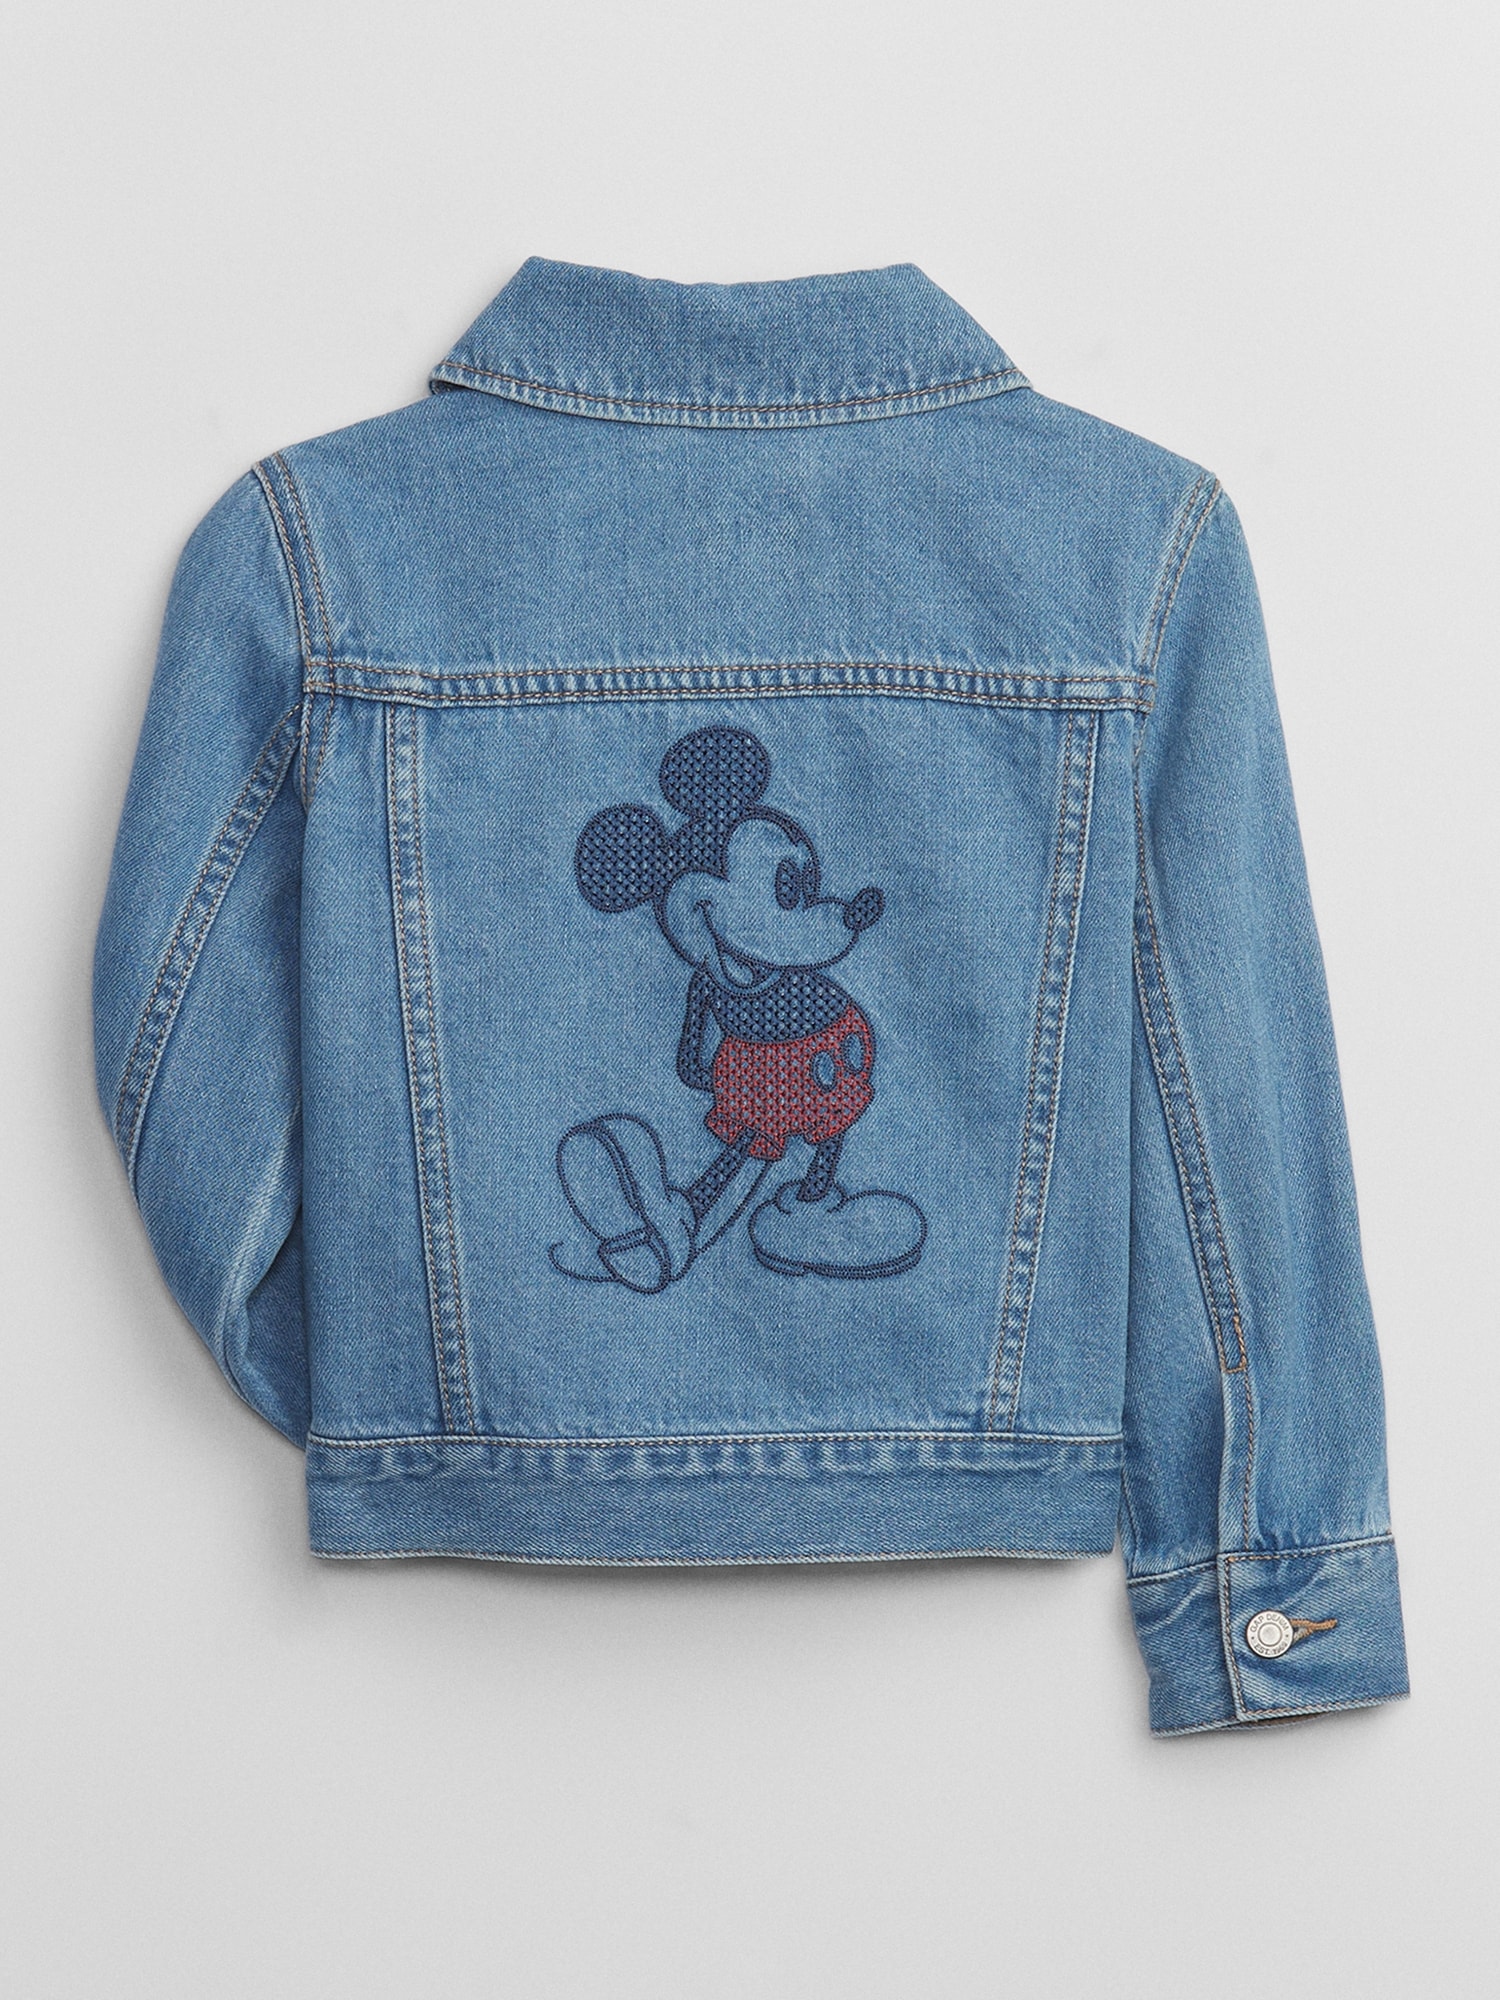 What to wear to Disney. Denim Jacket, Leggings, Mickey Mouse Tee